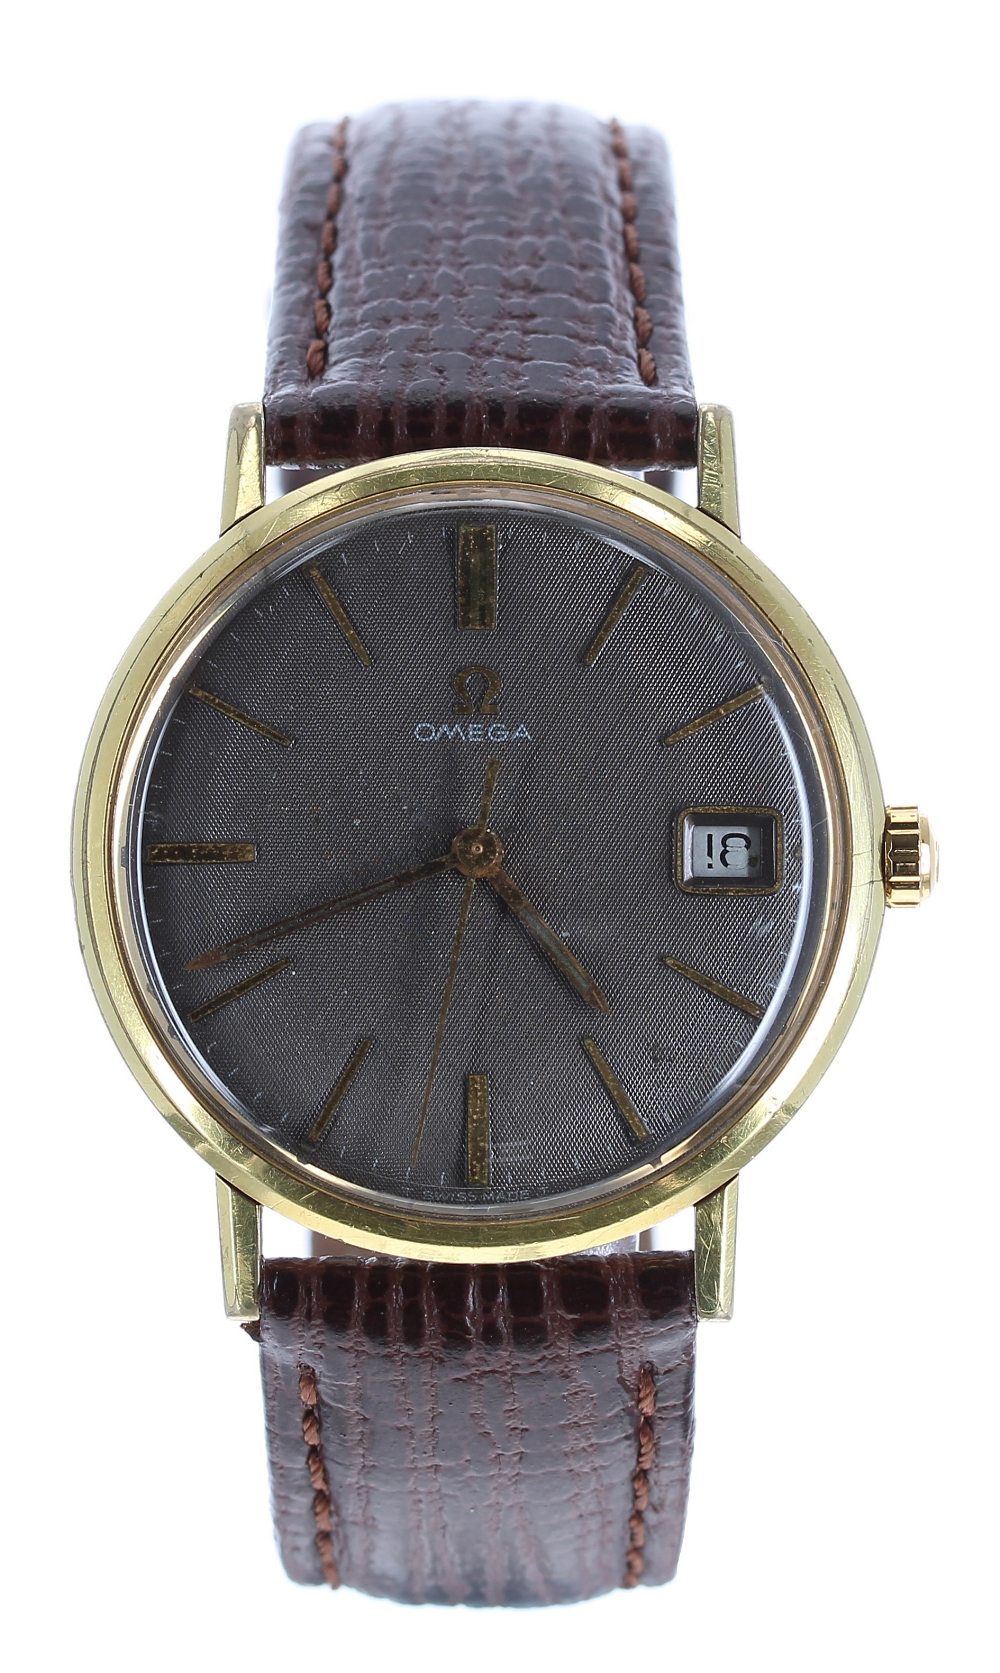 Omega gold plated and stainless steel gentleman's wristwatch, ref. 132.00019, circa 1966, serial no.